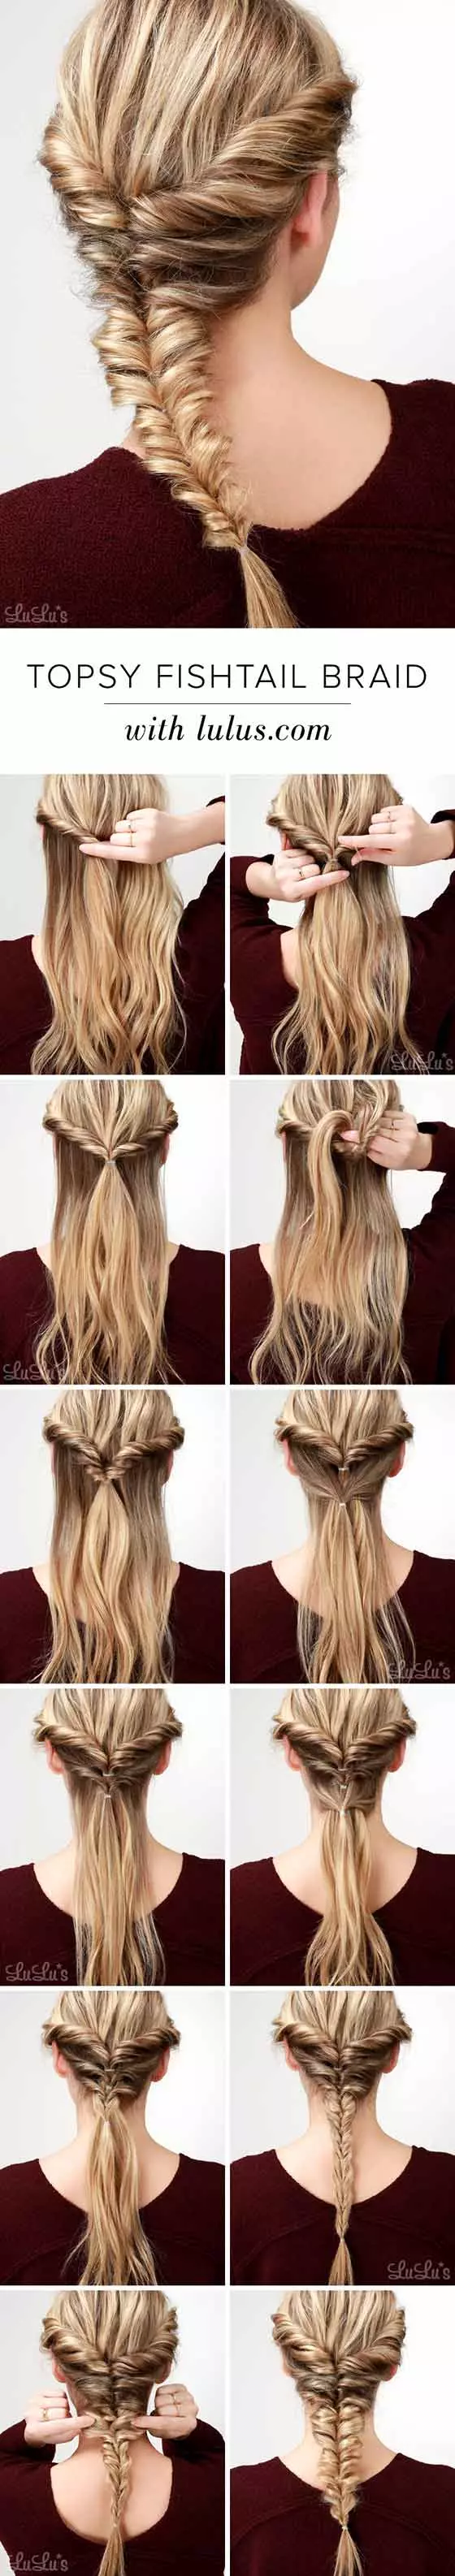 Topsy fishtail braided hairstyle for long hair